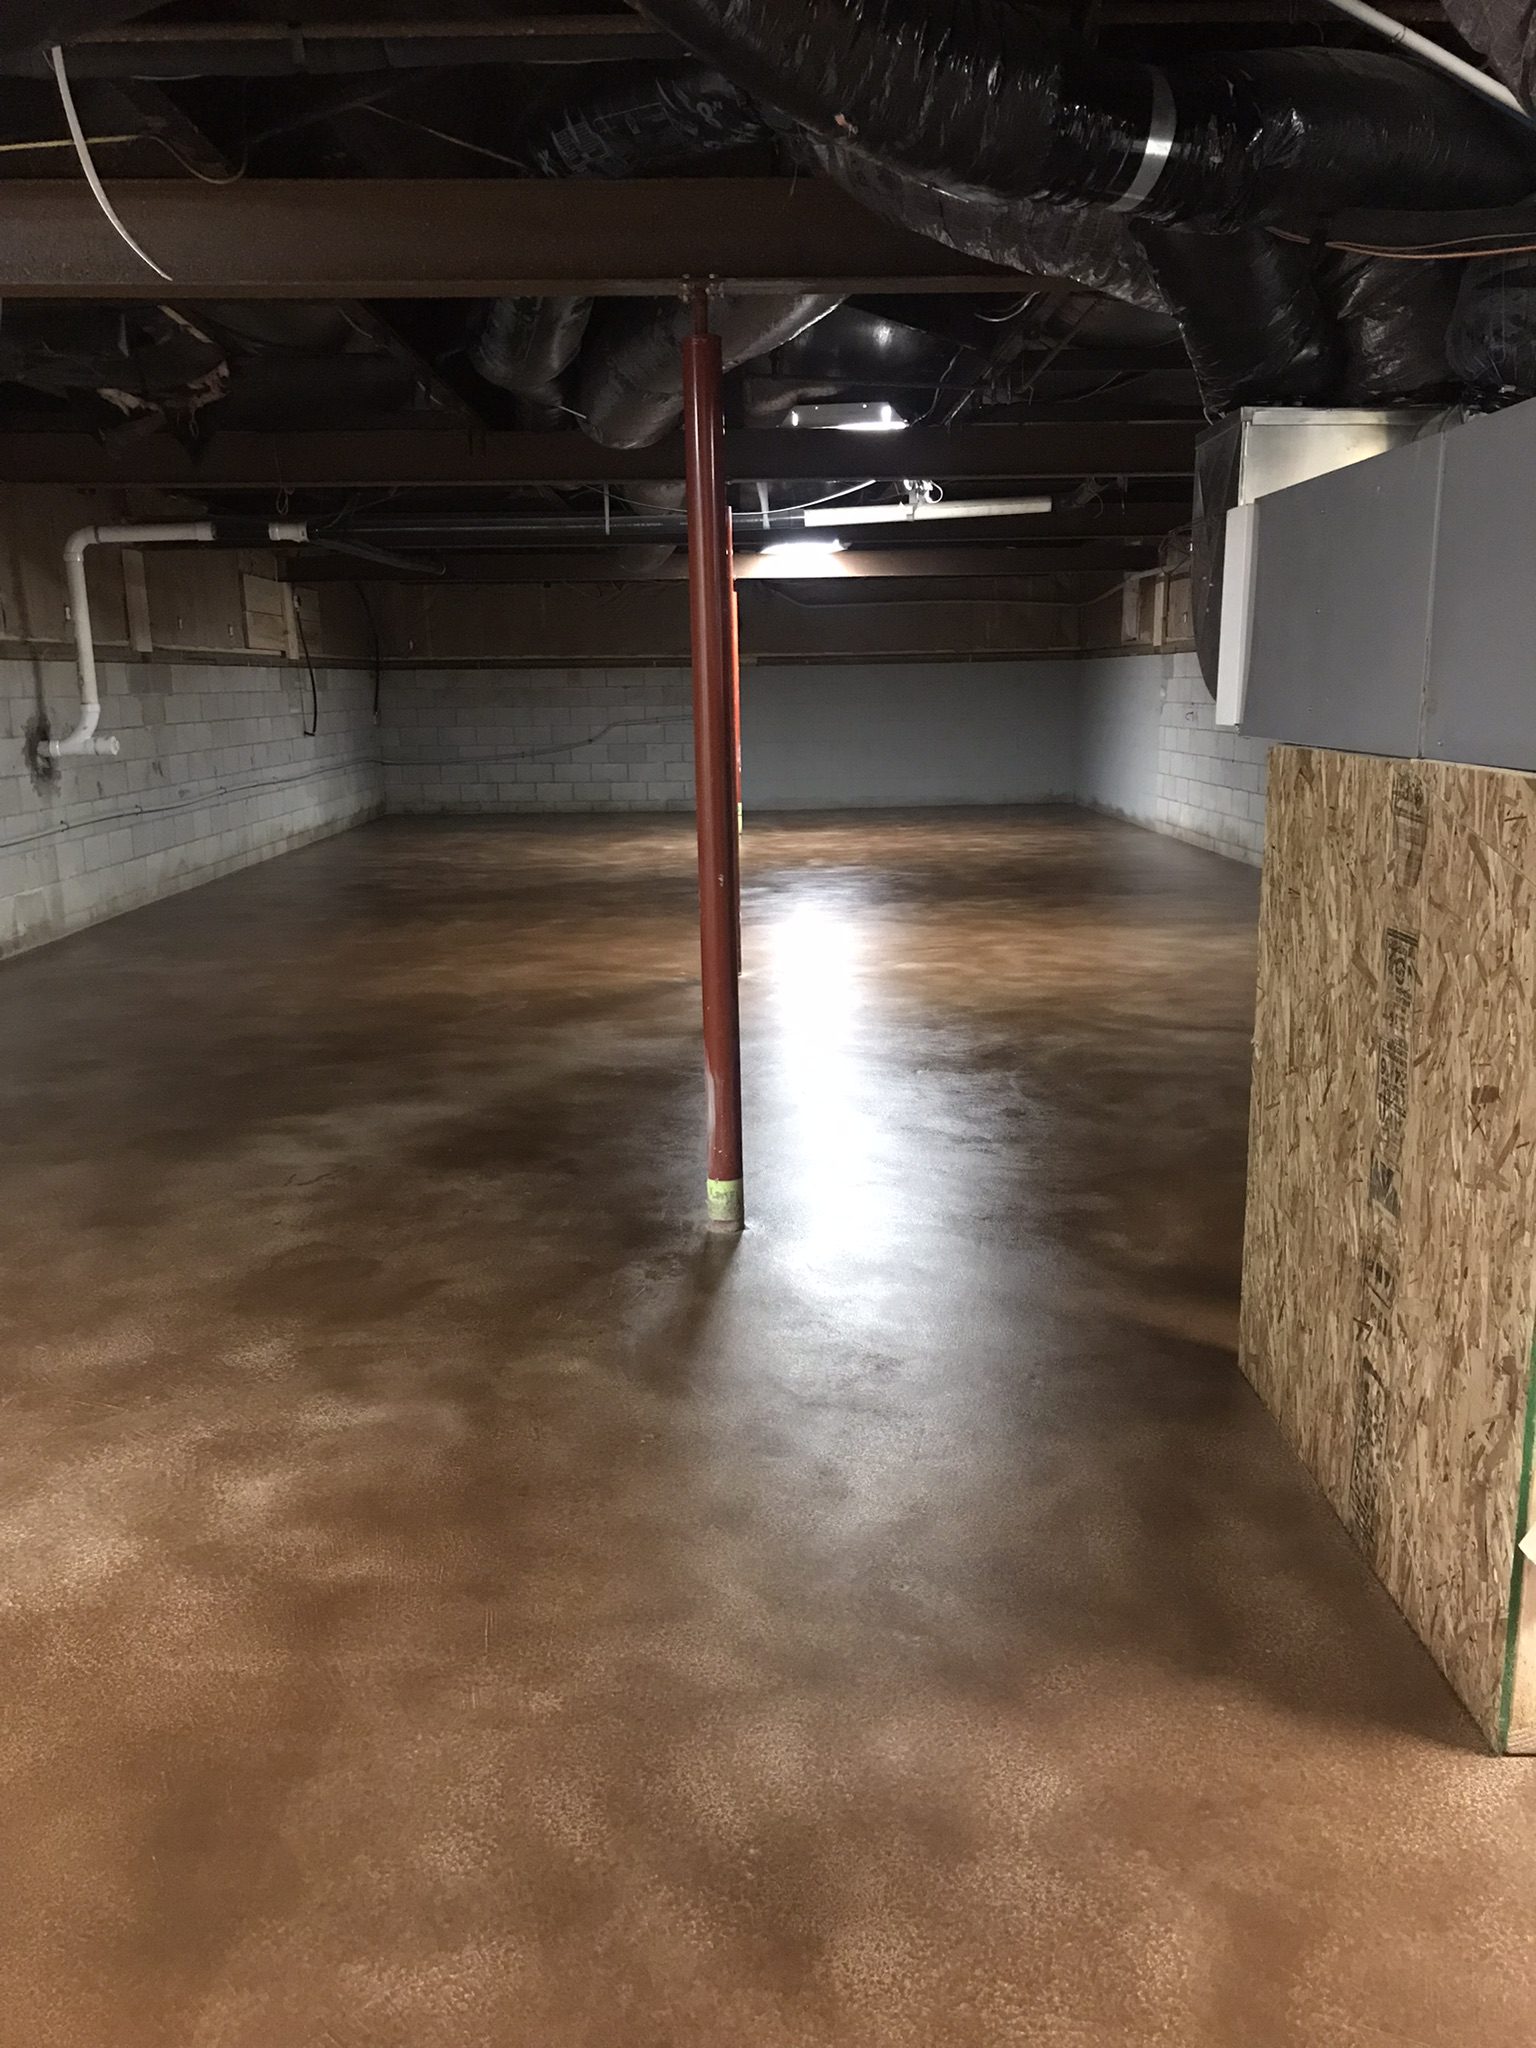 Cozy basement transformation with the floor stained in a warm Driftwood shade from AcquaTint™, complemented by a subtle satin sheen from ProWax Polish™